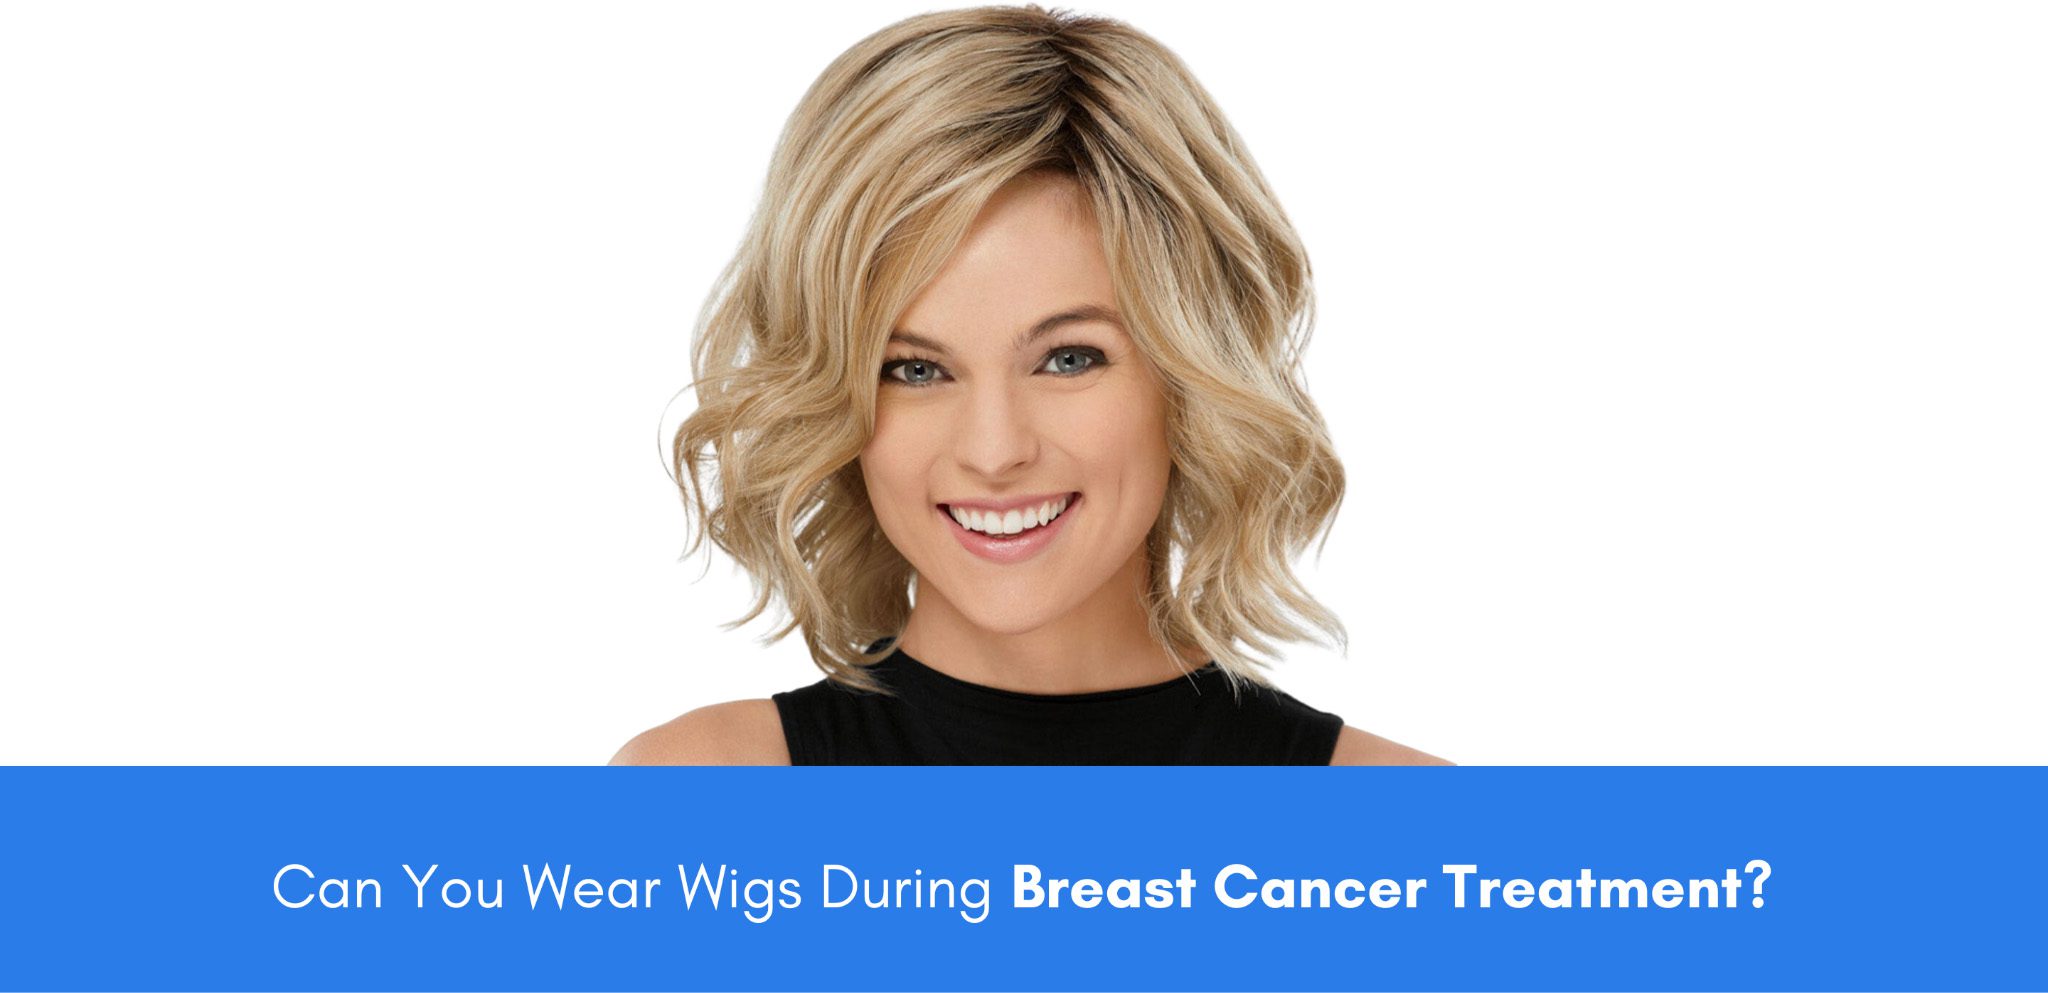 Can You Wear Wigs During Breast Cancer Treatment?